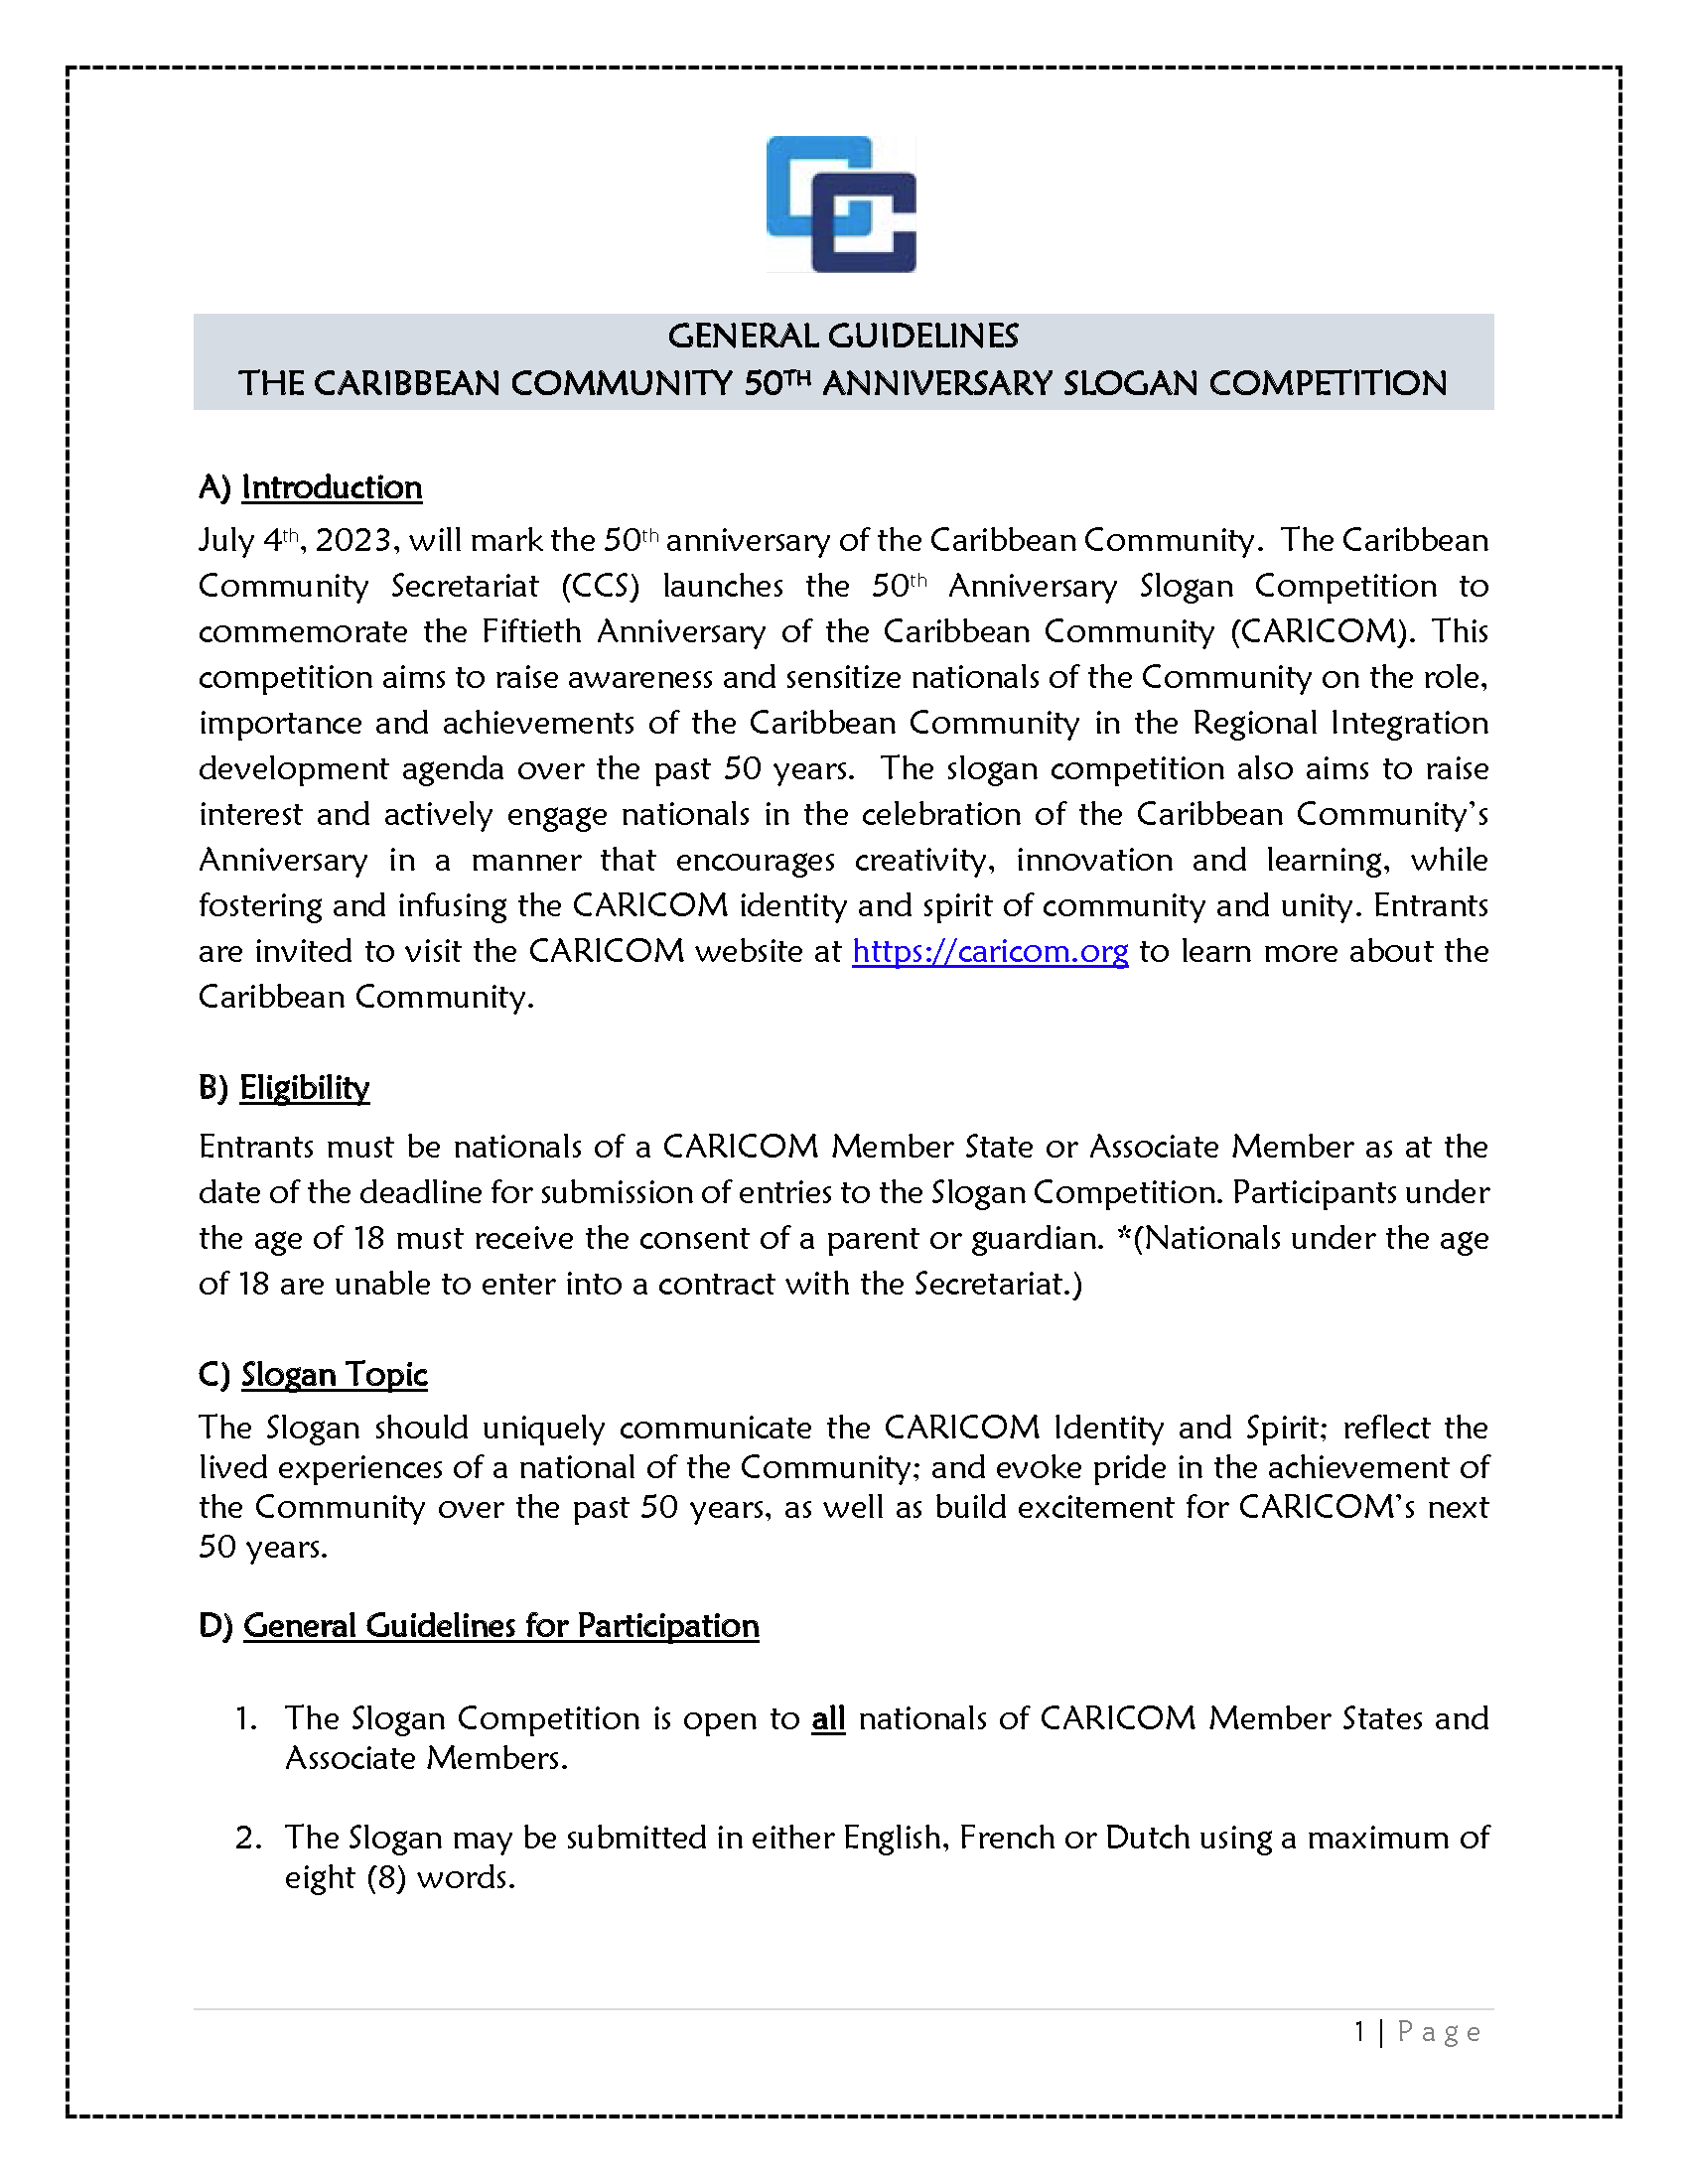 TT CARISEC CARICOM 50 Anniversary Slogan Competition General Guidelines 9 Aug 2022_Page_1